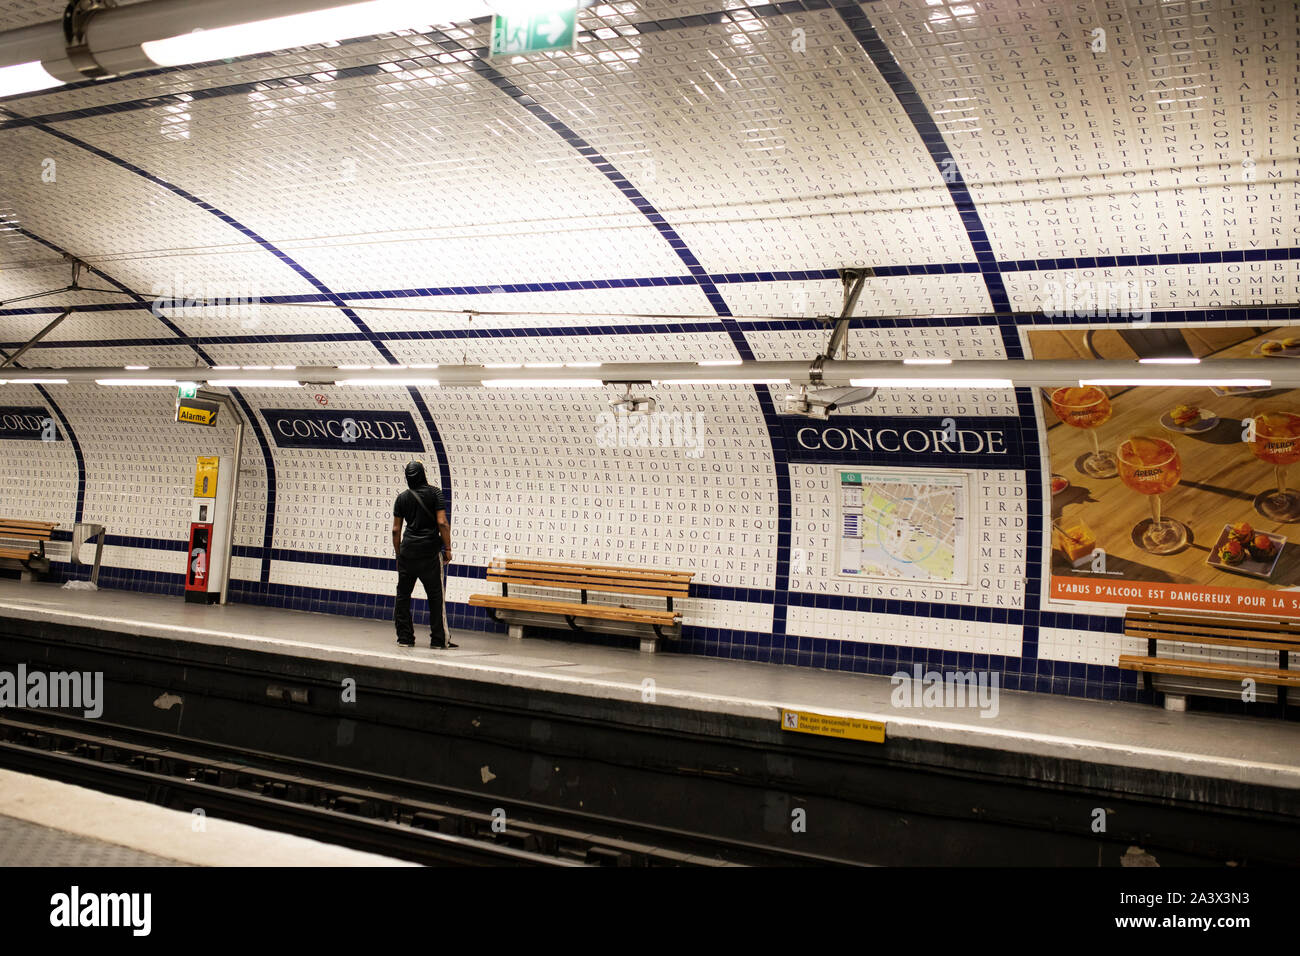 The platform at the Concorde metro station in Paris, France. Stock Photo